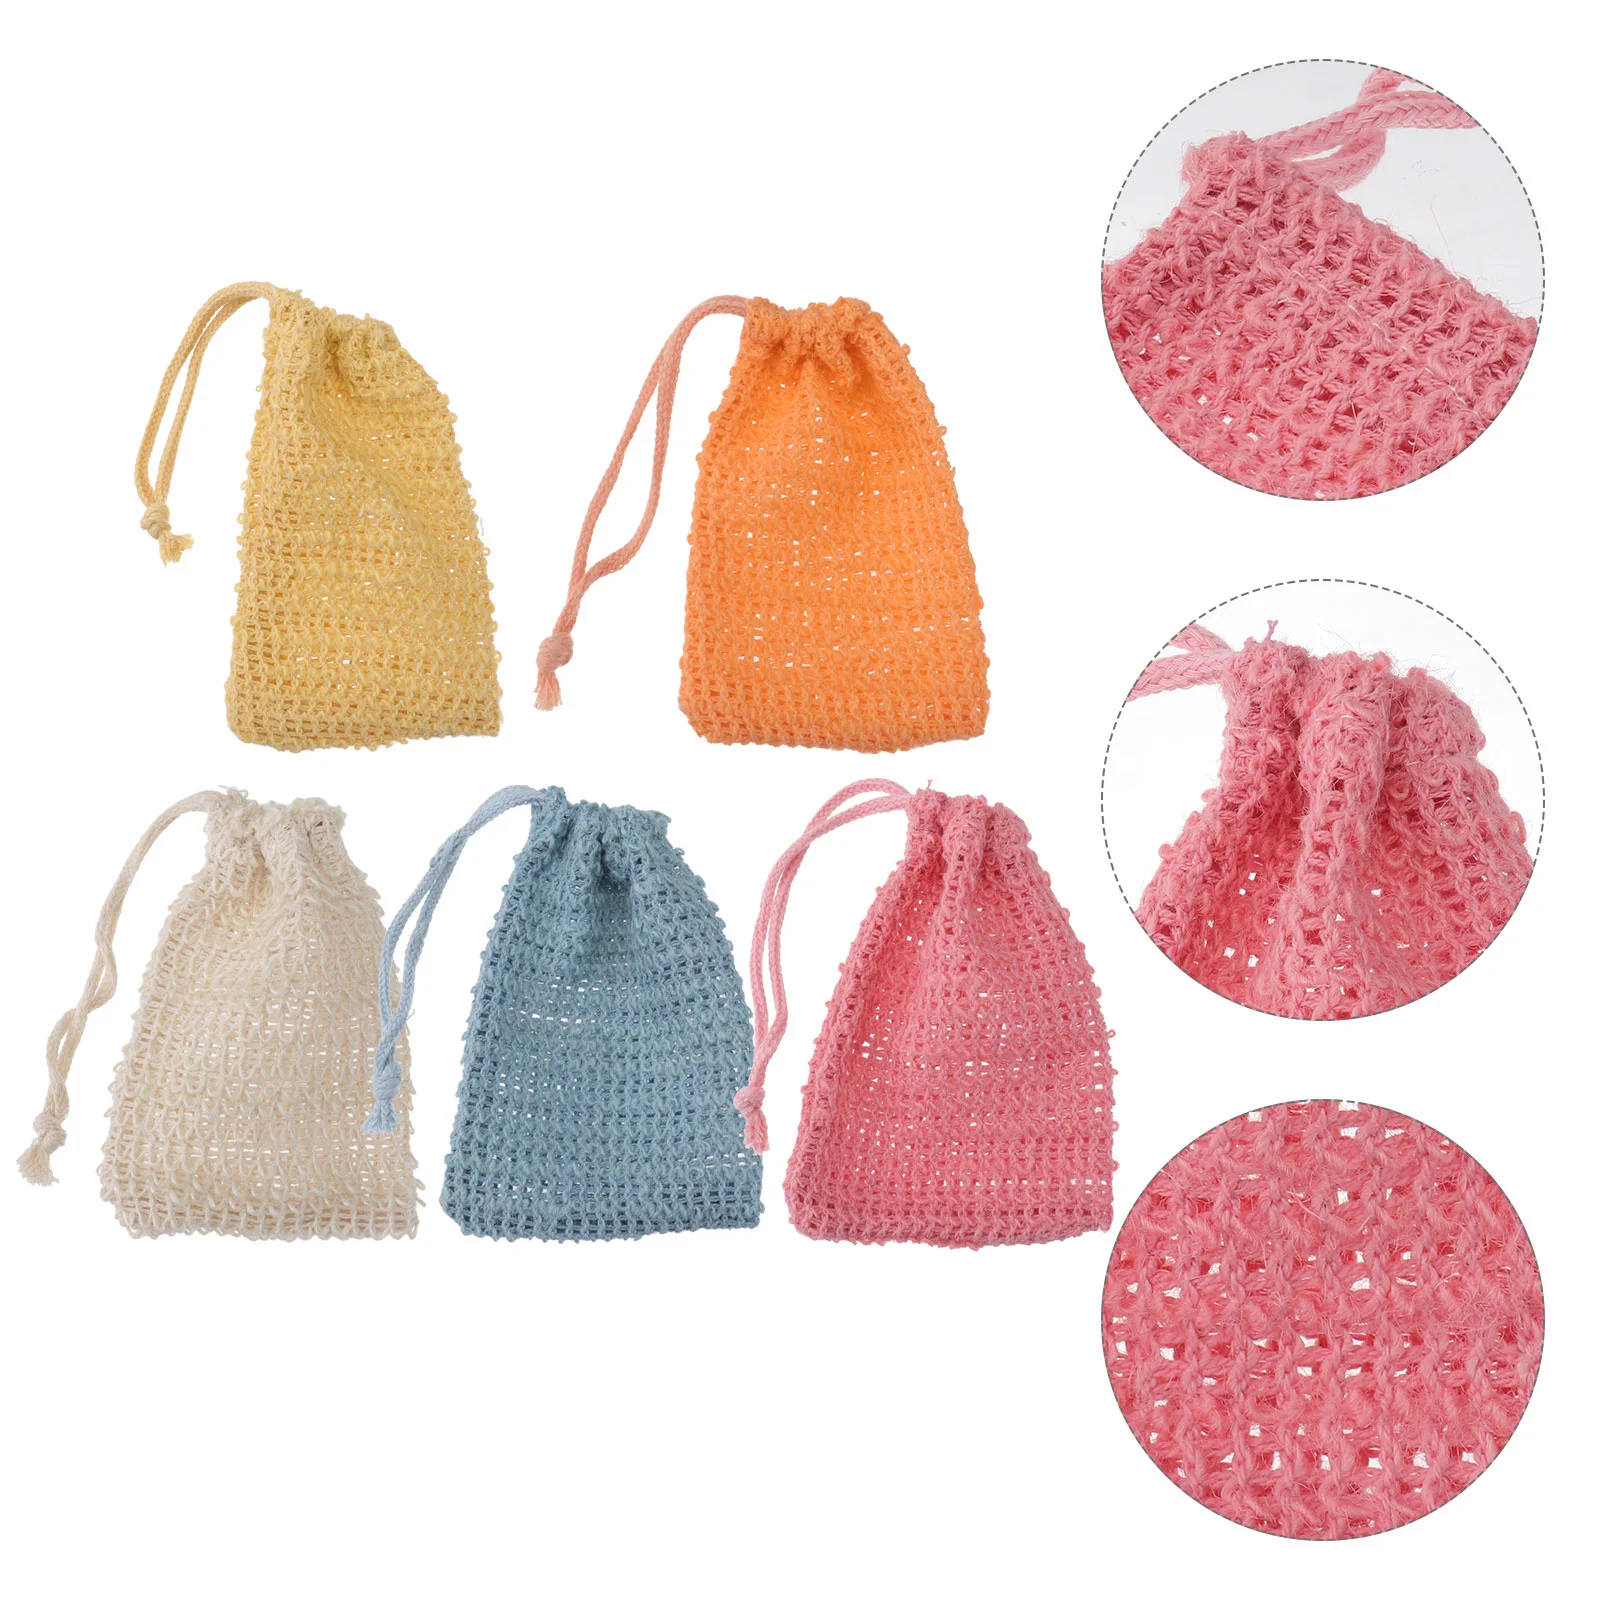 

5pcs Saver Bag and Exfoliating Towel Foaming Mesh Net Natural Bubbling with Drawstring for Cleaning Shower Bath Saver Bag Mixed